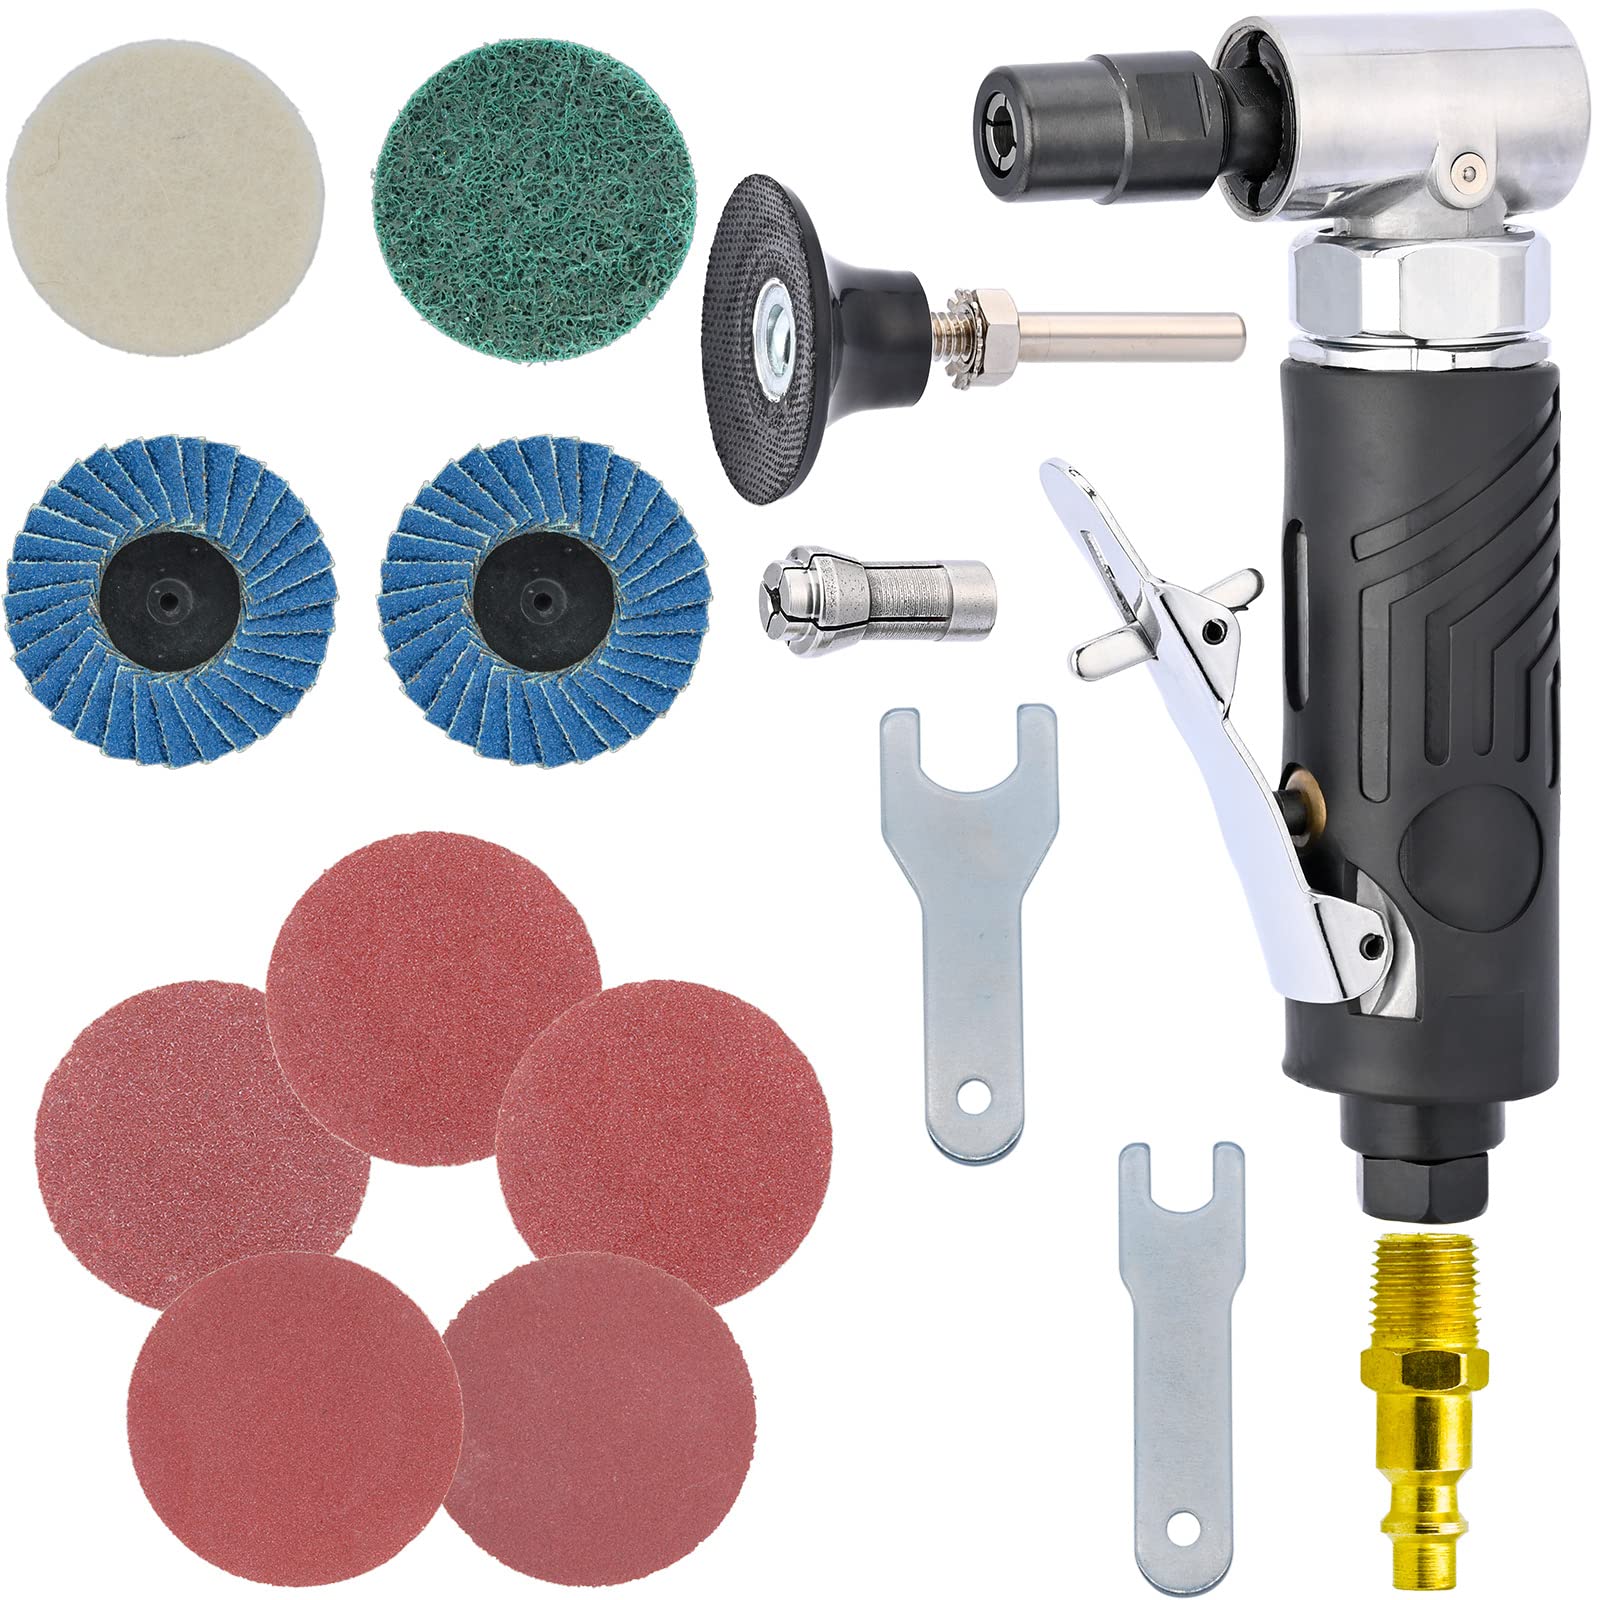 BOWD 14 Inch Angle Air Die Grinder, Mini Angle Air Grinder With 9 Pcs 2 Inch Roll Lock Polishing And Sanding Discs For Air Die Grinde